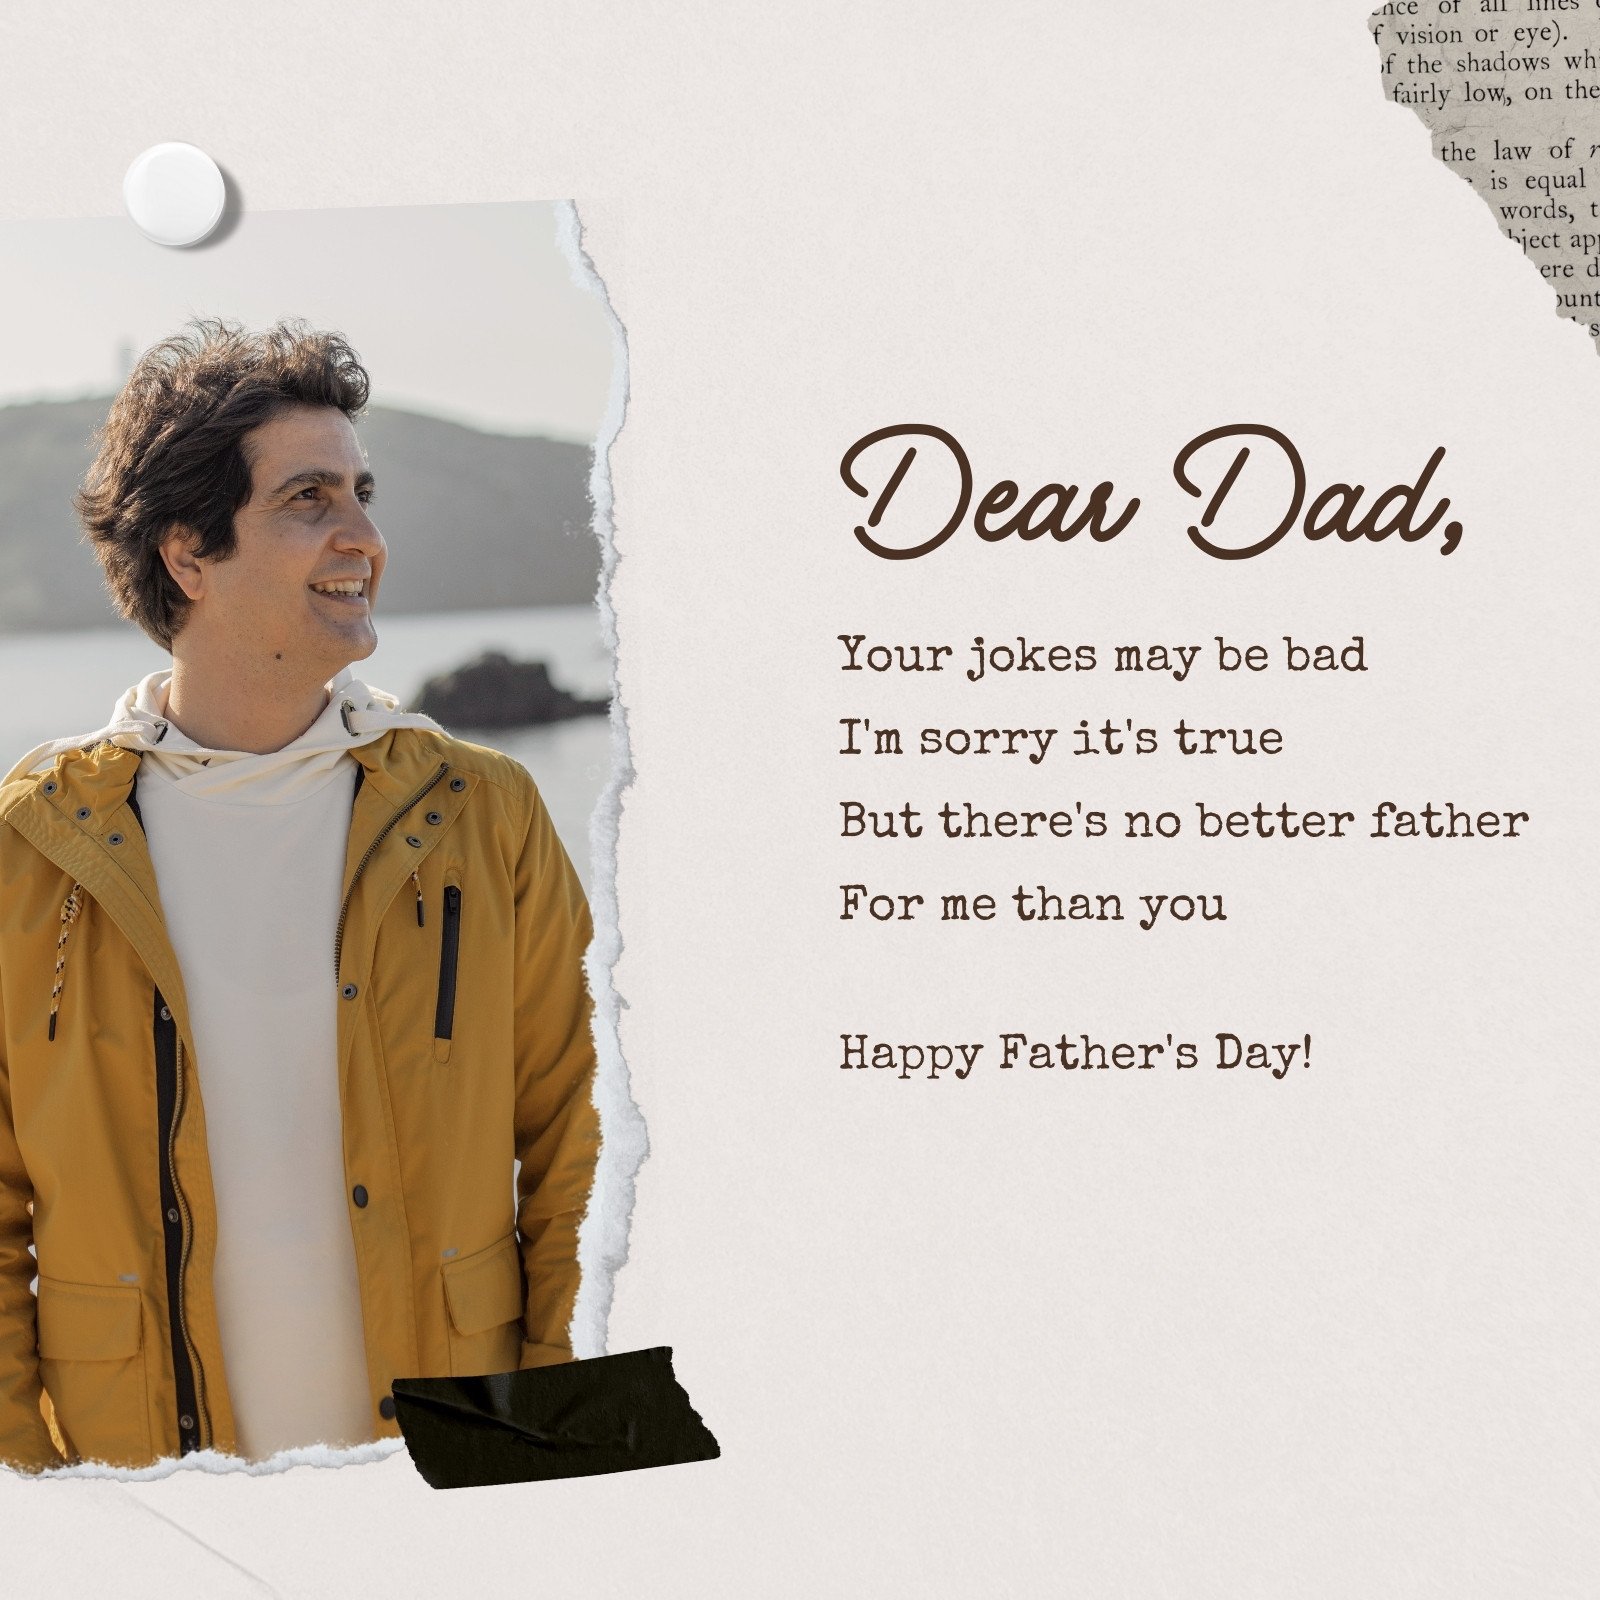 Paper Collage Funny Dear Dad Father's Day Poem Instagram Post